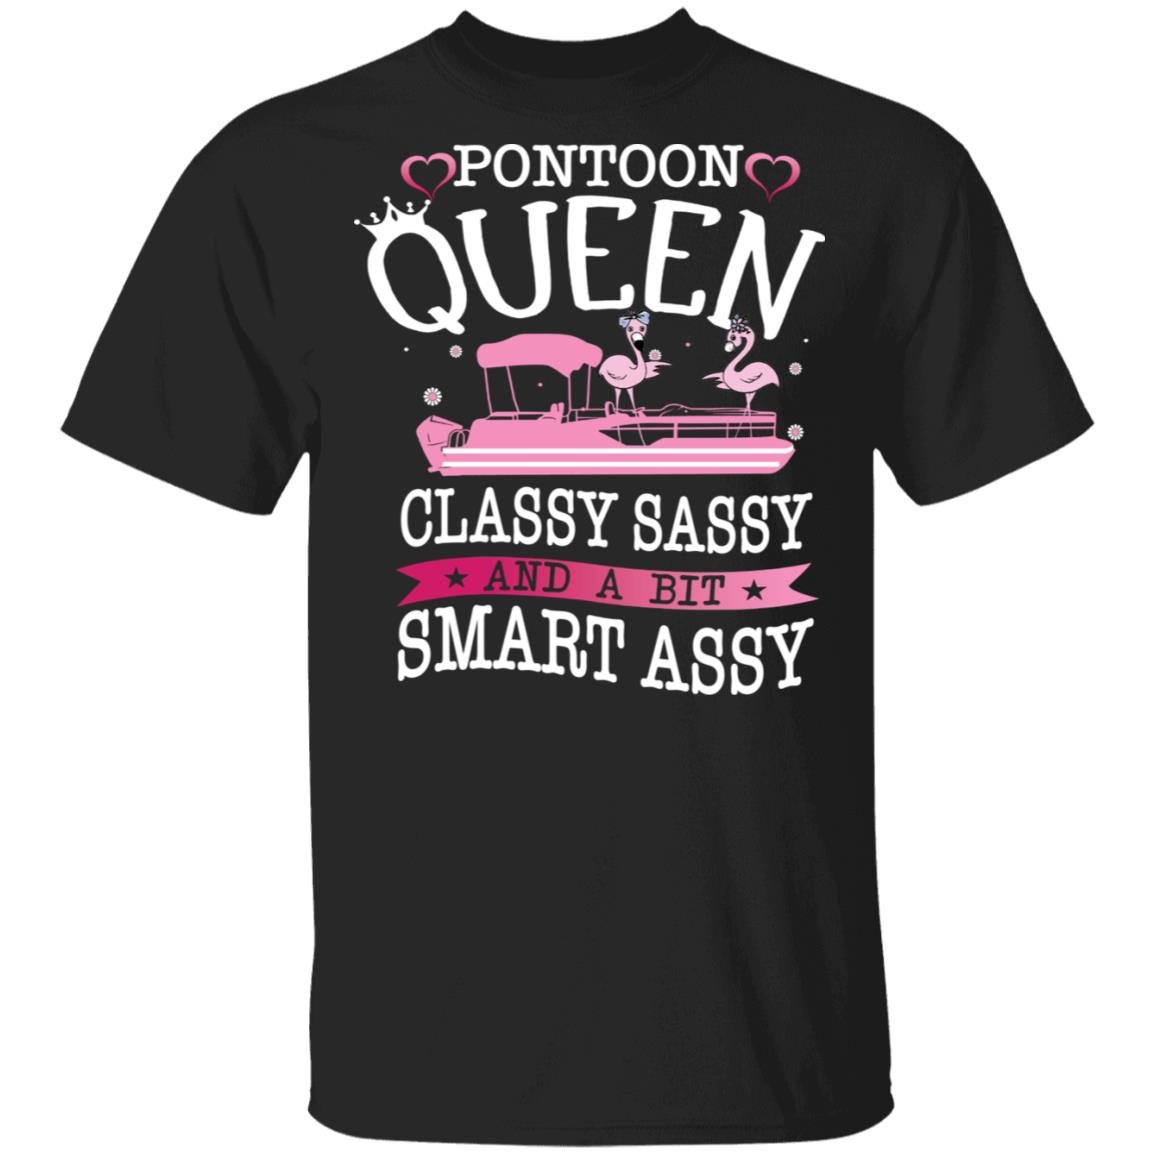 Flamingo Pontoon Queen Classy Sassy And A Bit Smart Assy T Shirt Size